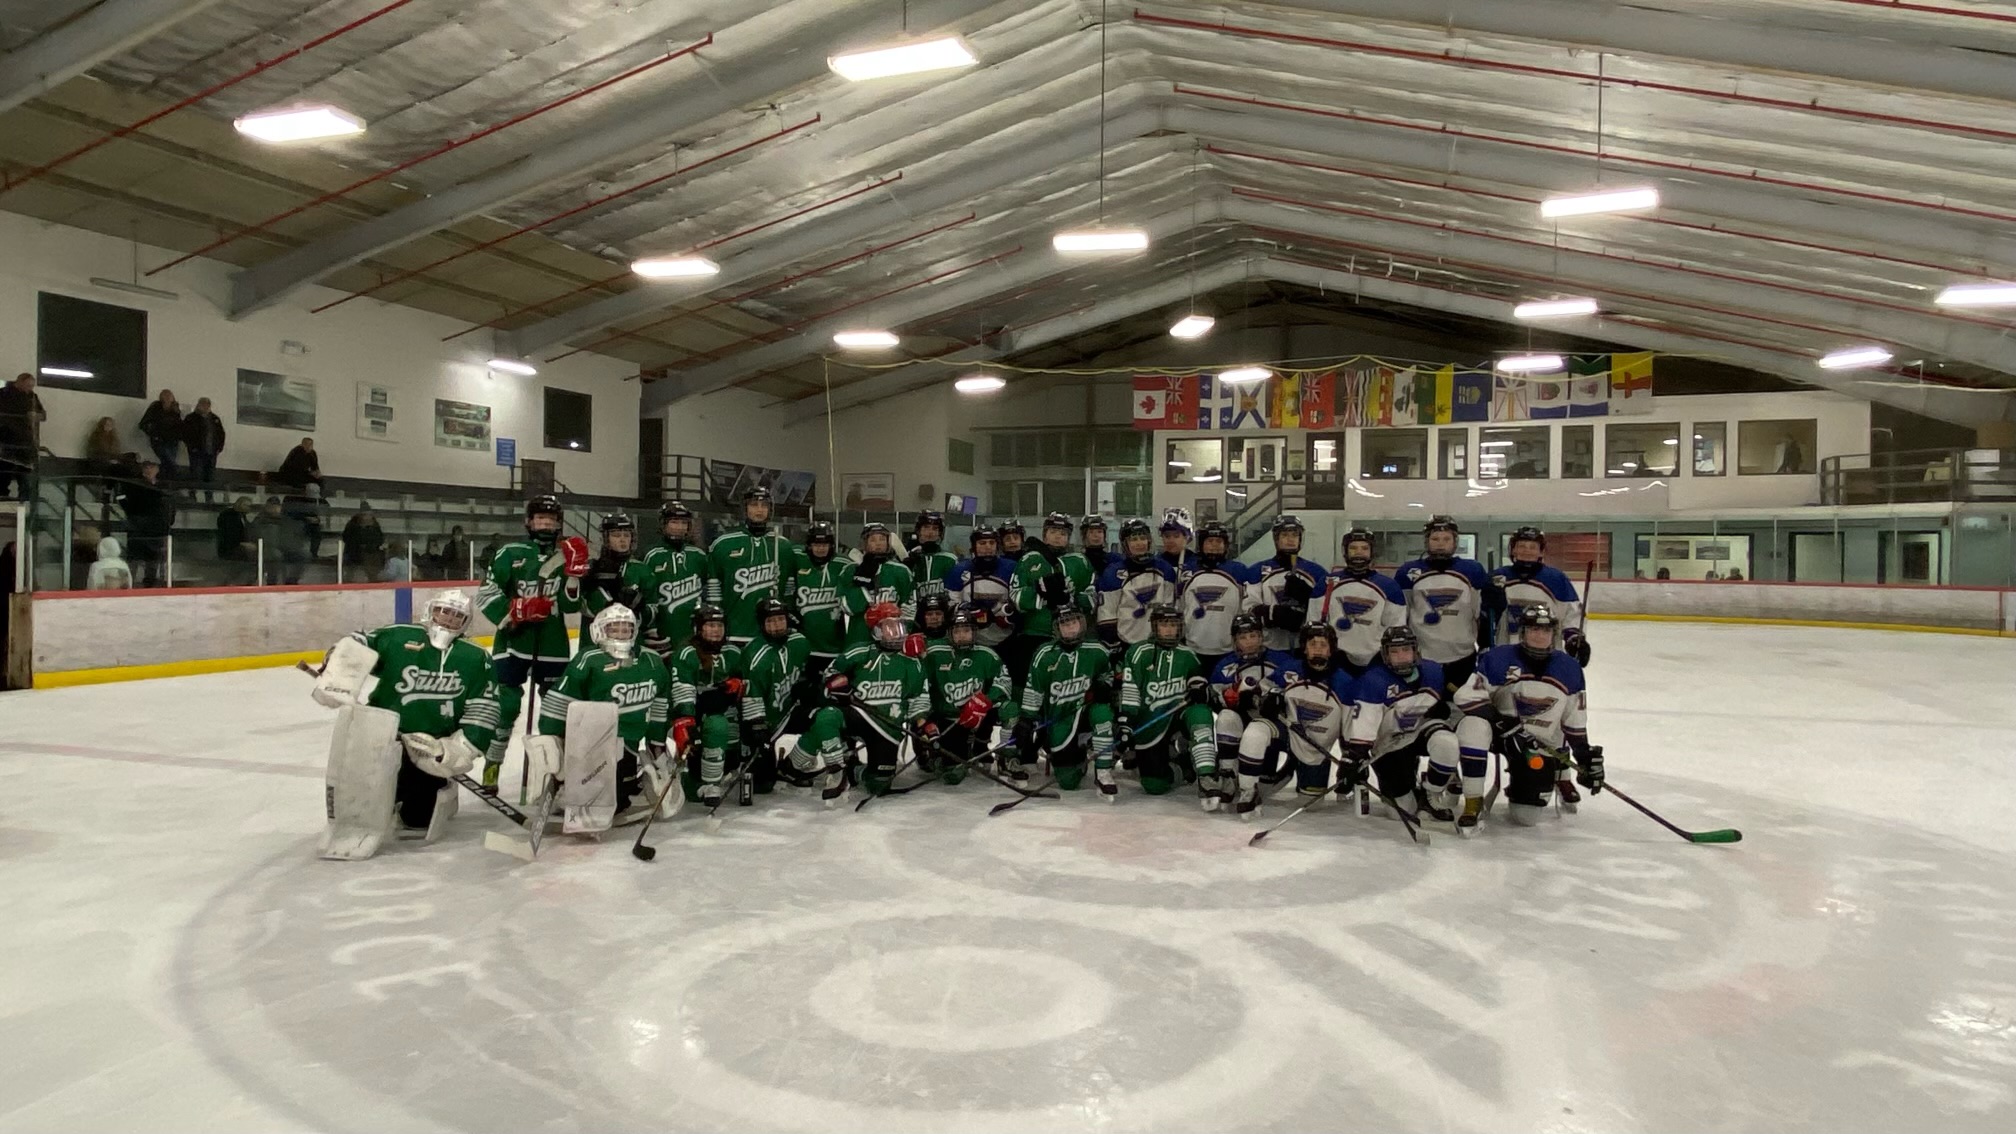 How an Irish hockey team without an ice rink is turning heads at N.S. tournament